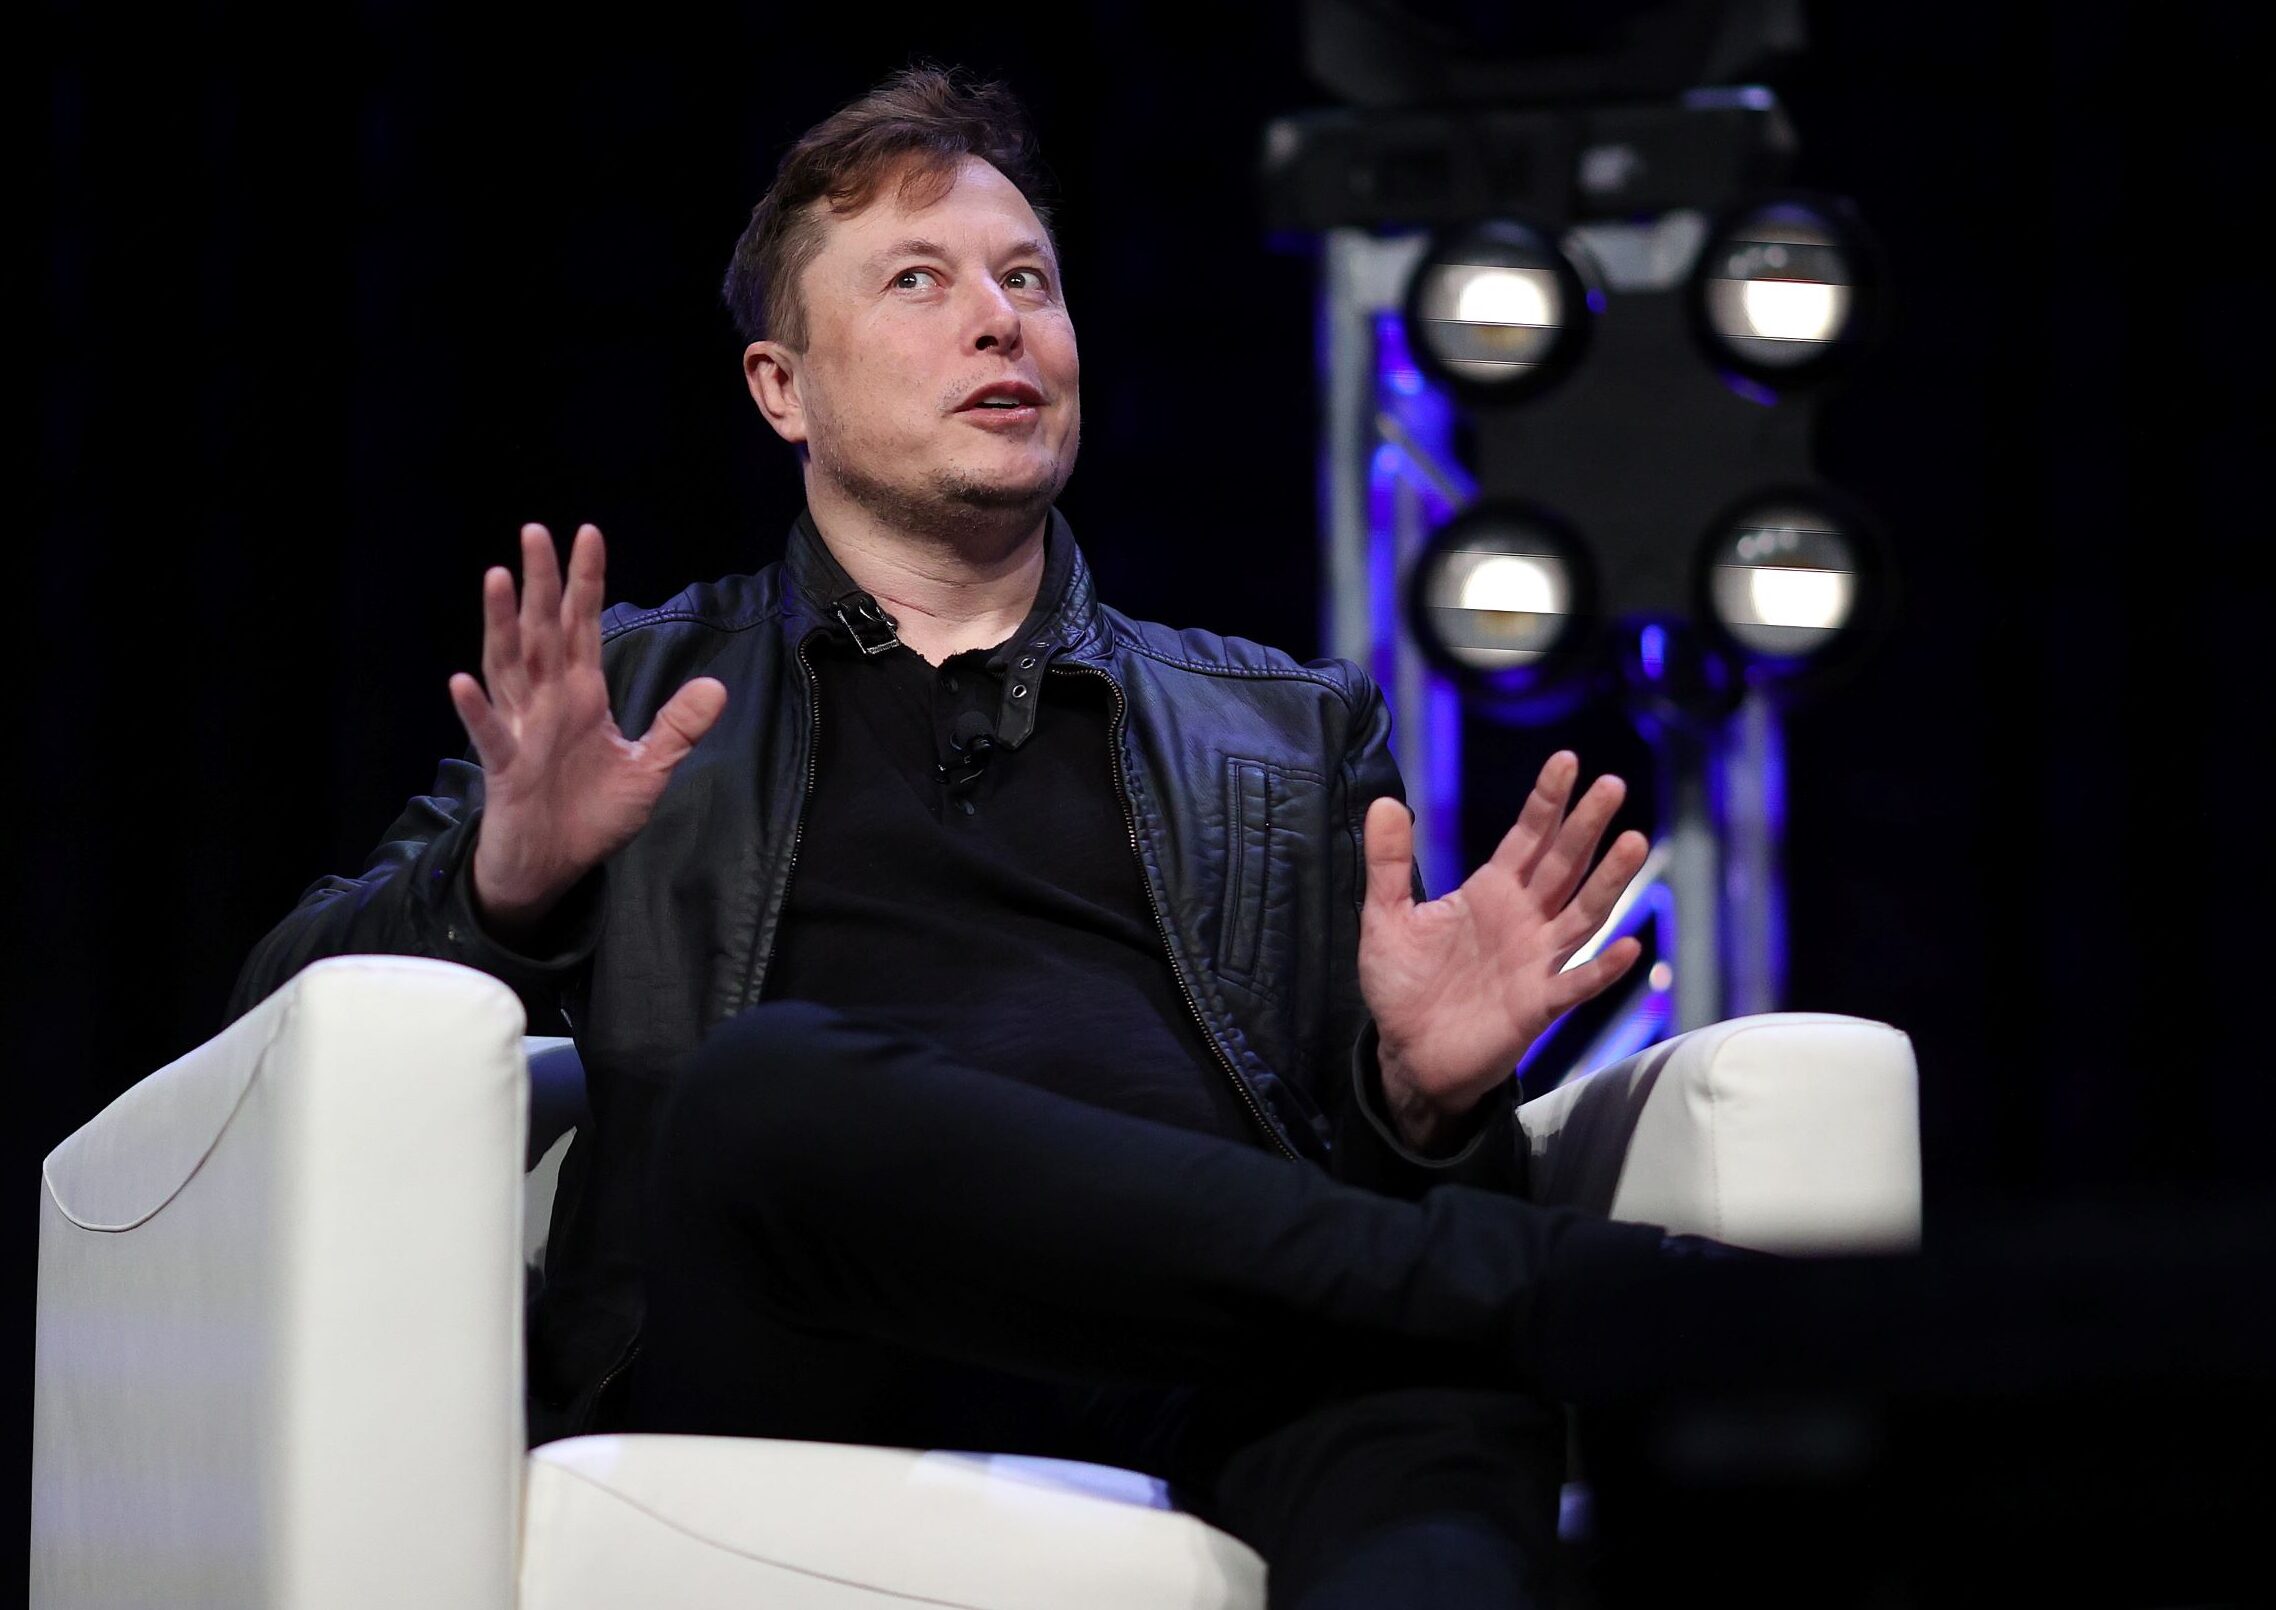 Twitter to Subject Impersonators to Permanent Ban: Elon Musk